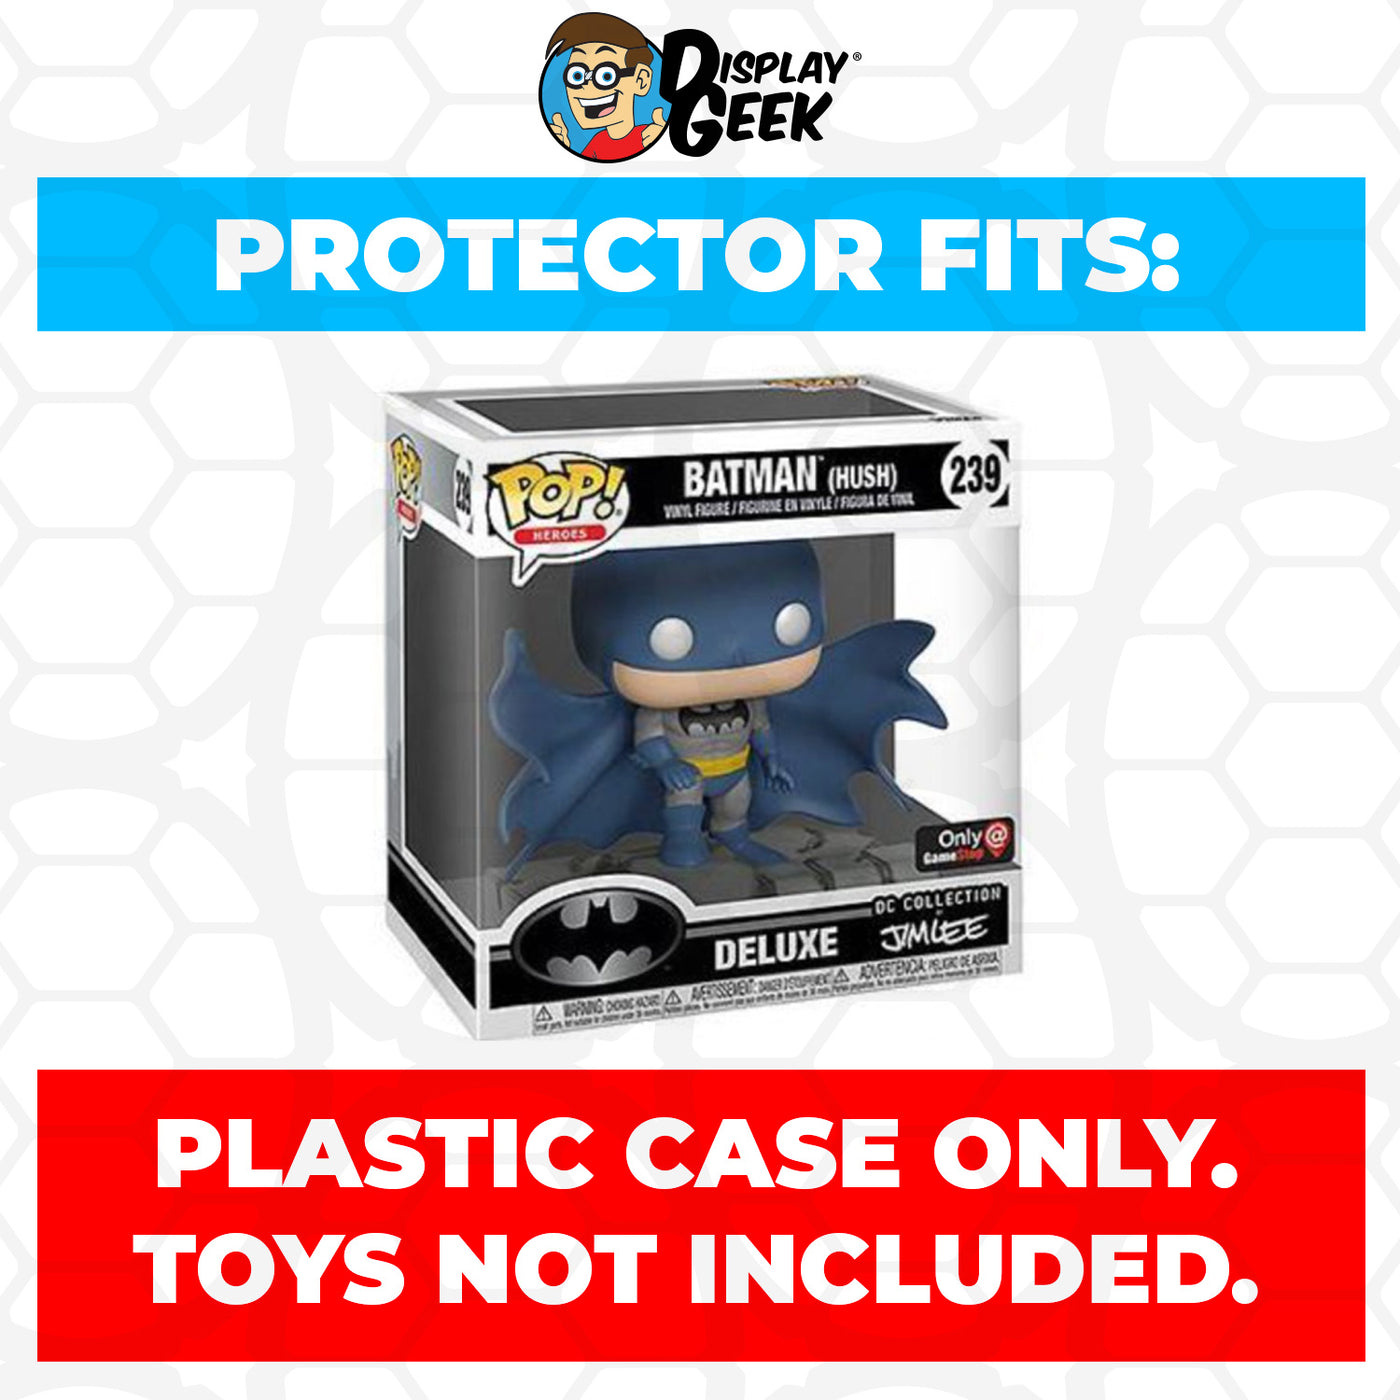 Pop Protector for Batman Hush Jim Lee Blue #239 Funko Pop Deluxe on The Protector Guide App by Display Geek